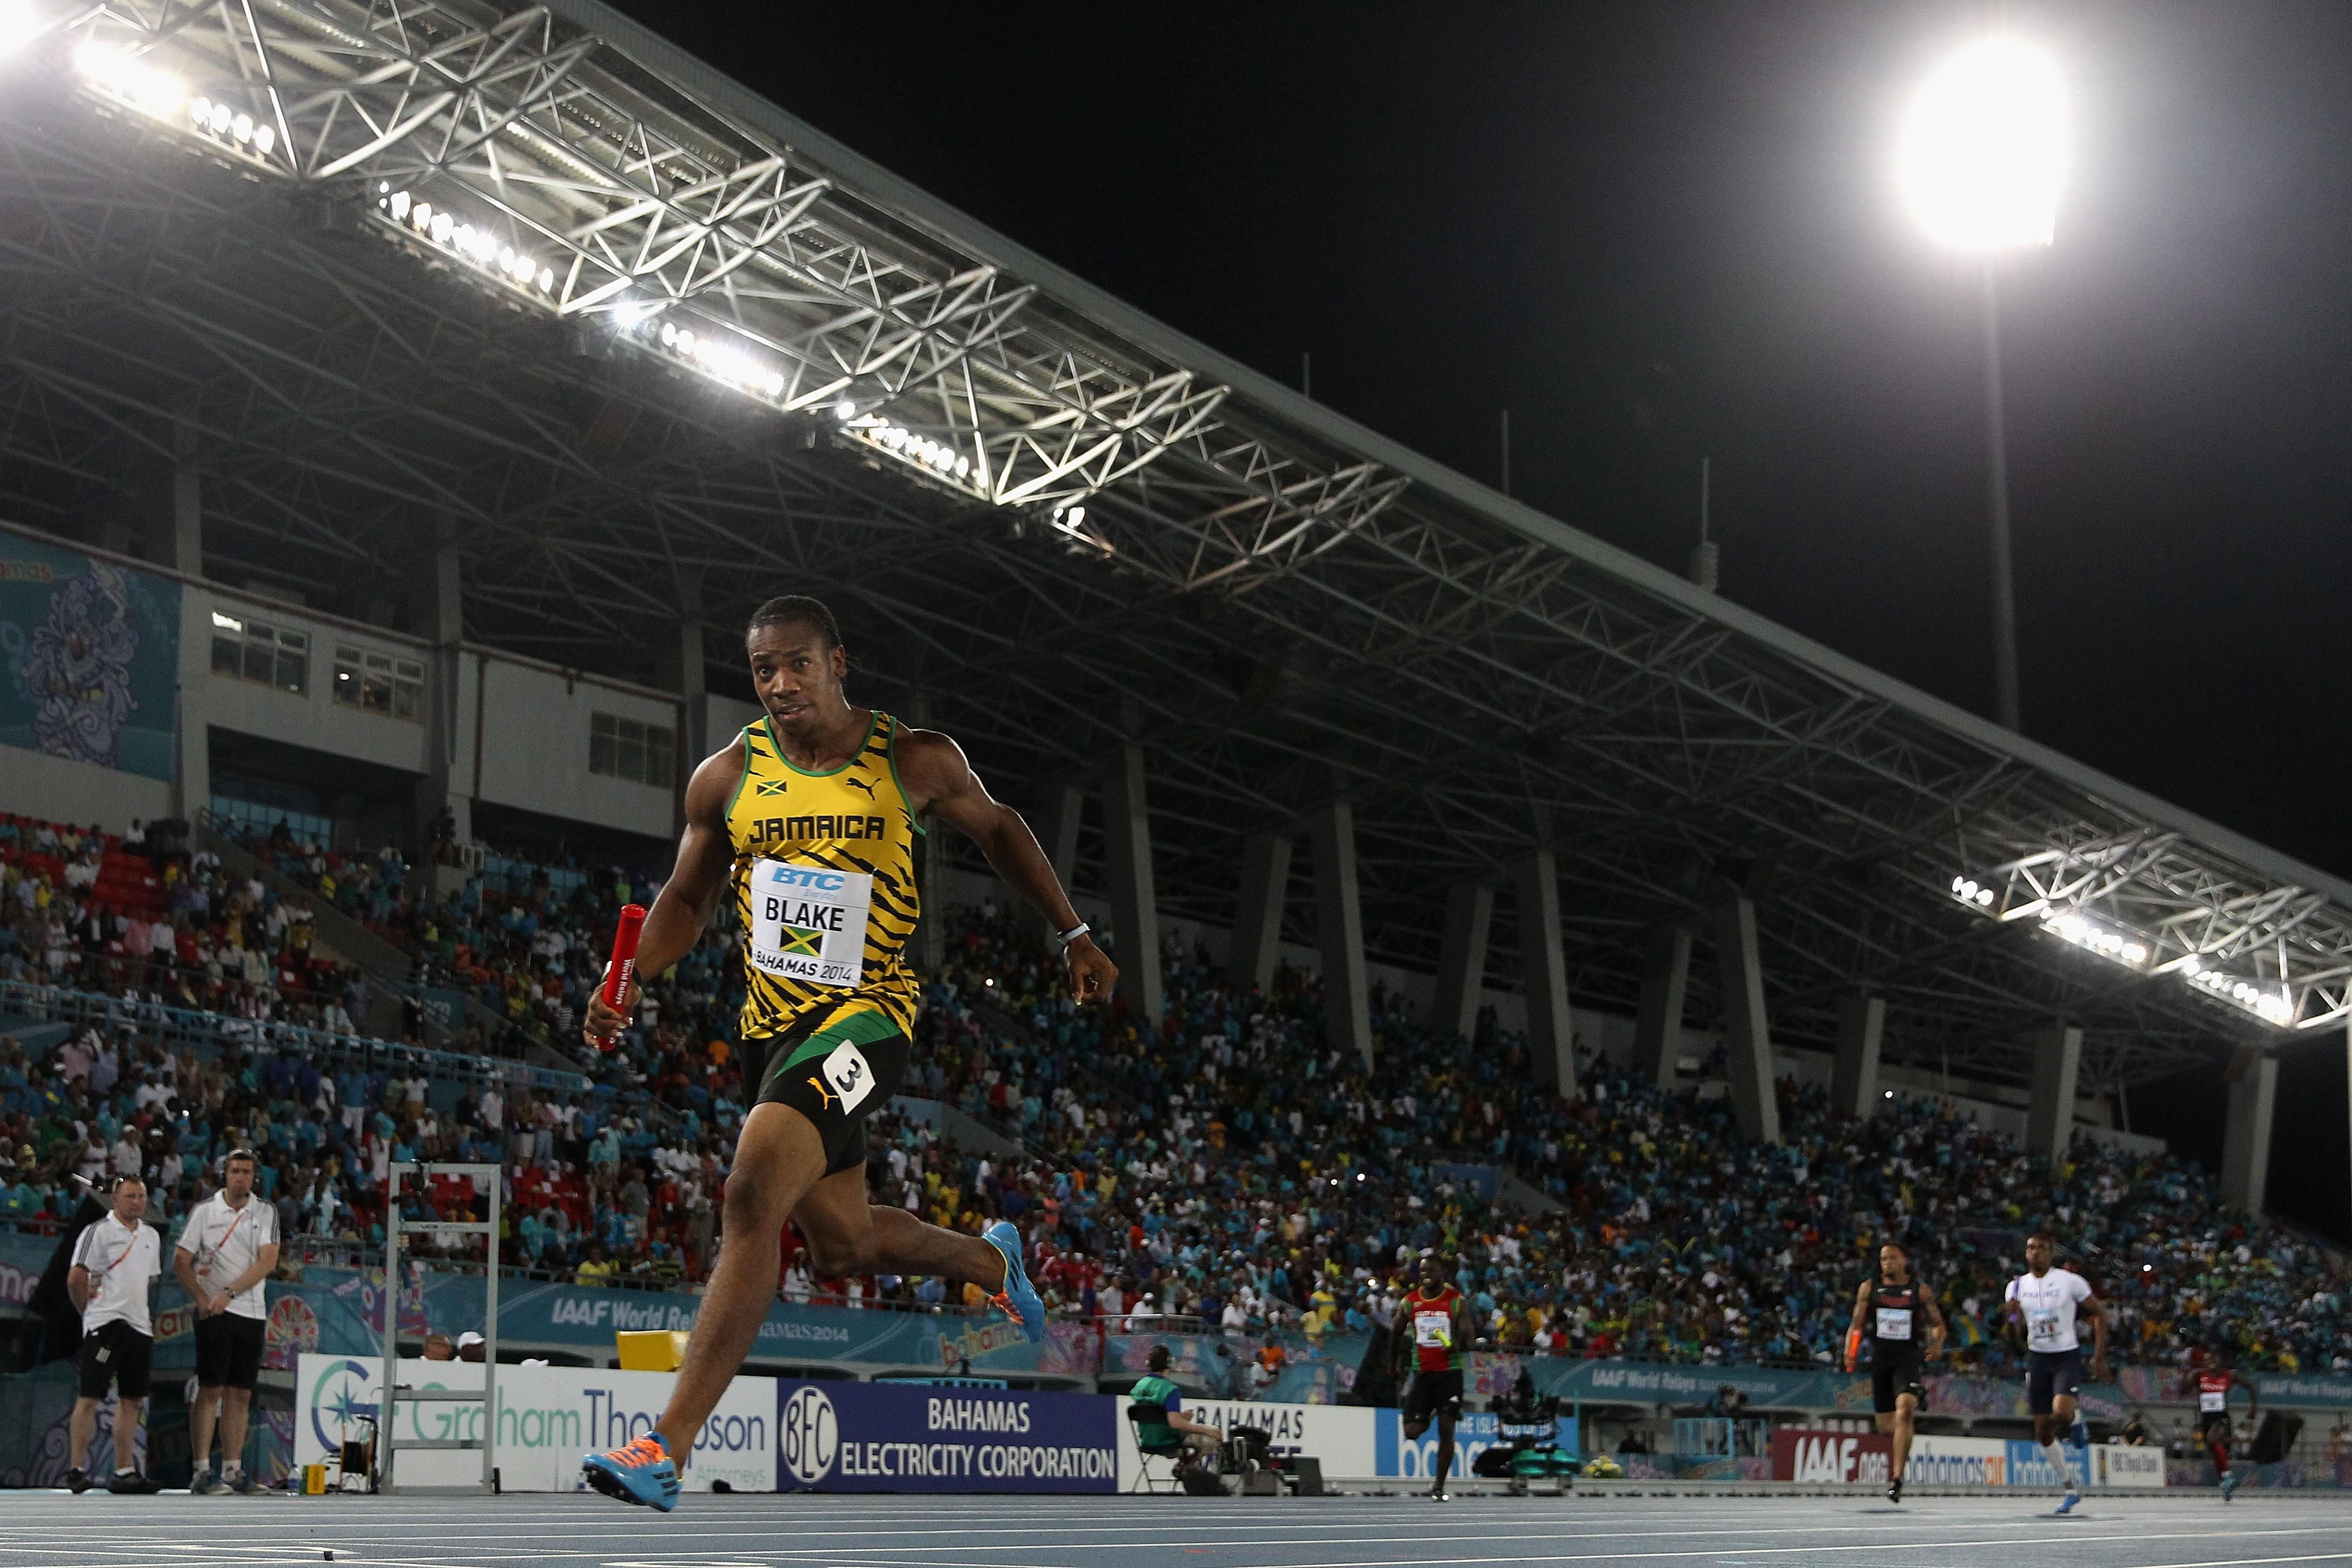 Yohan Blake anchors Jamaica to a world 4x200m record at the 2014 World Relays